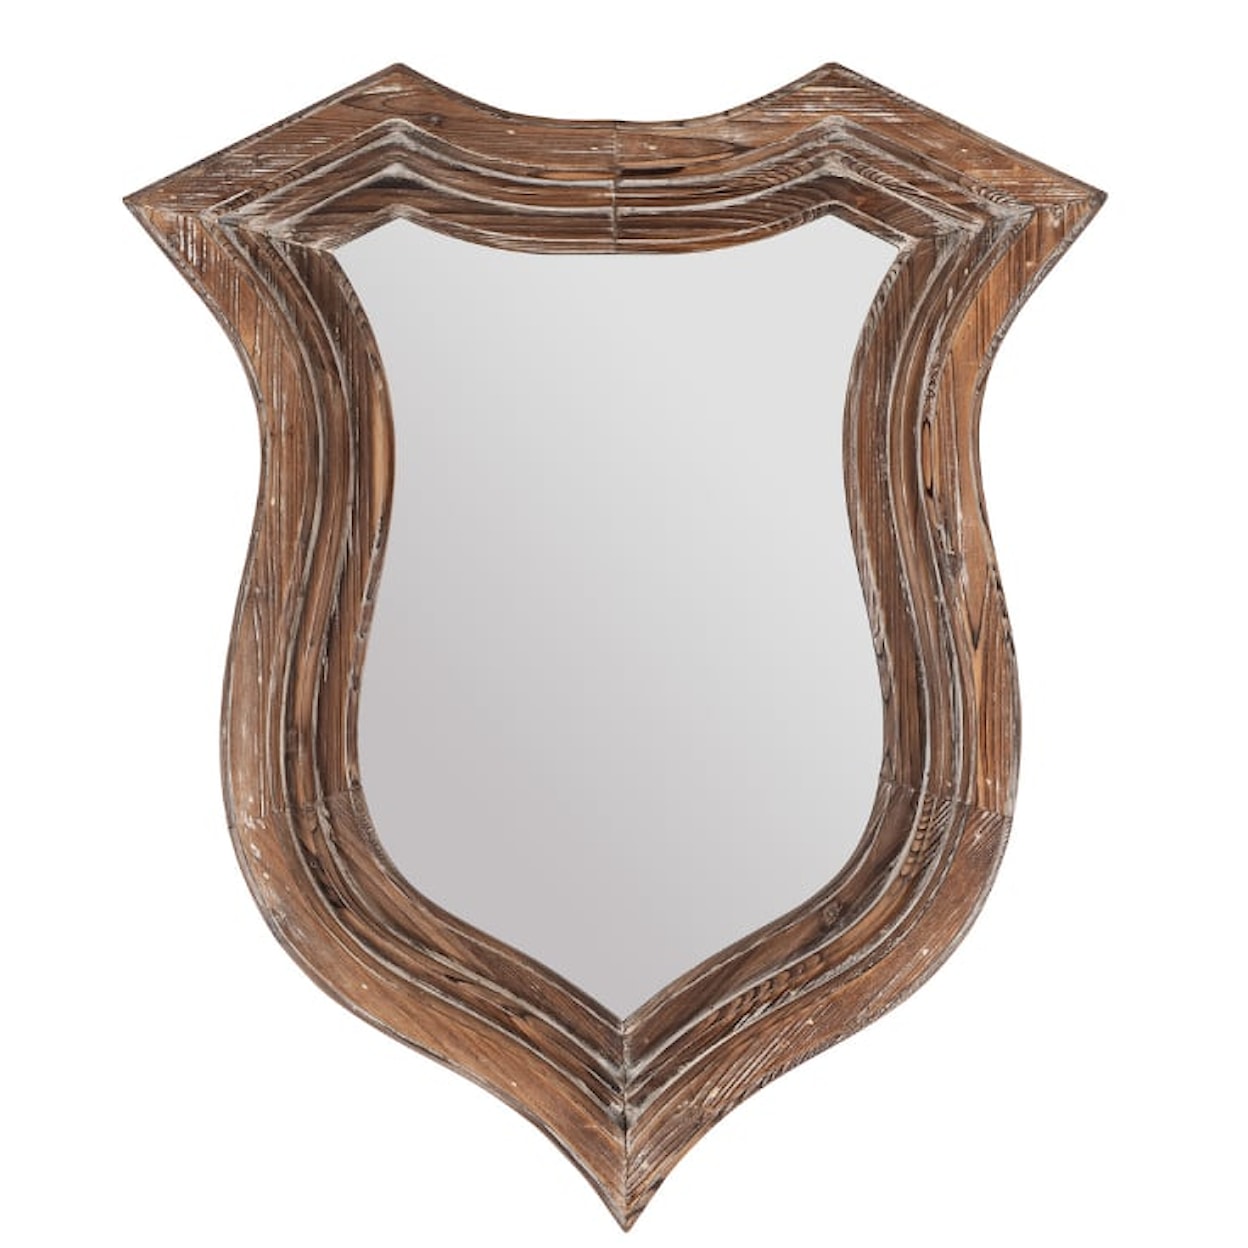 BOBO Intriguing Objects Accessory Distressed Fir Wood Trophy Mirror 2